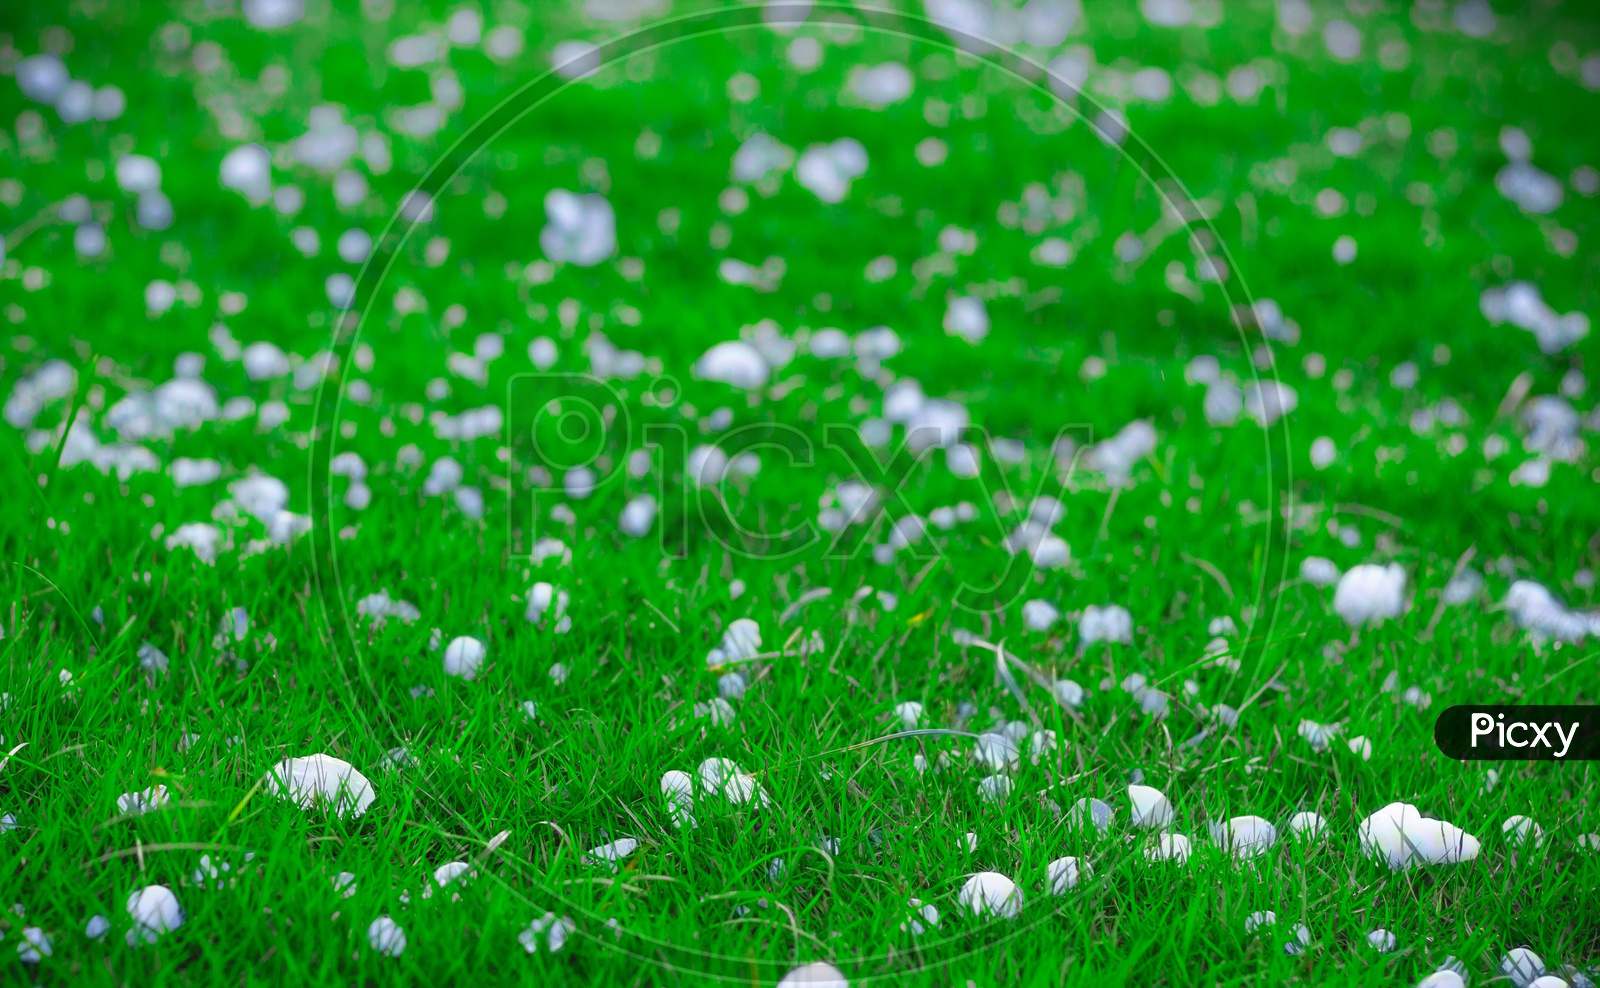 Flakes And Balls Of Ice Crystals On Green Grass After A Hail Storm Appearing Scenic In A Shallow Depth Of Field Landscape Image